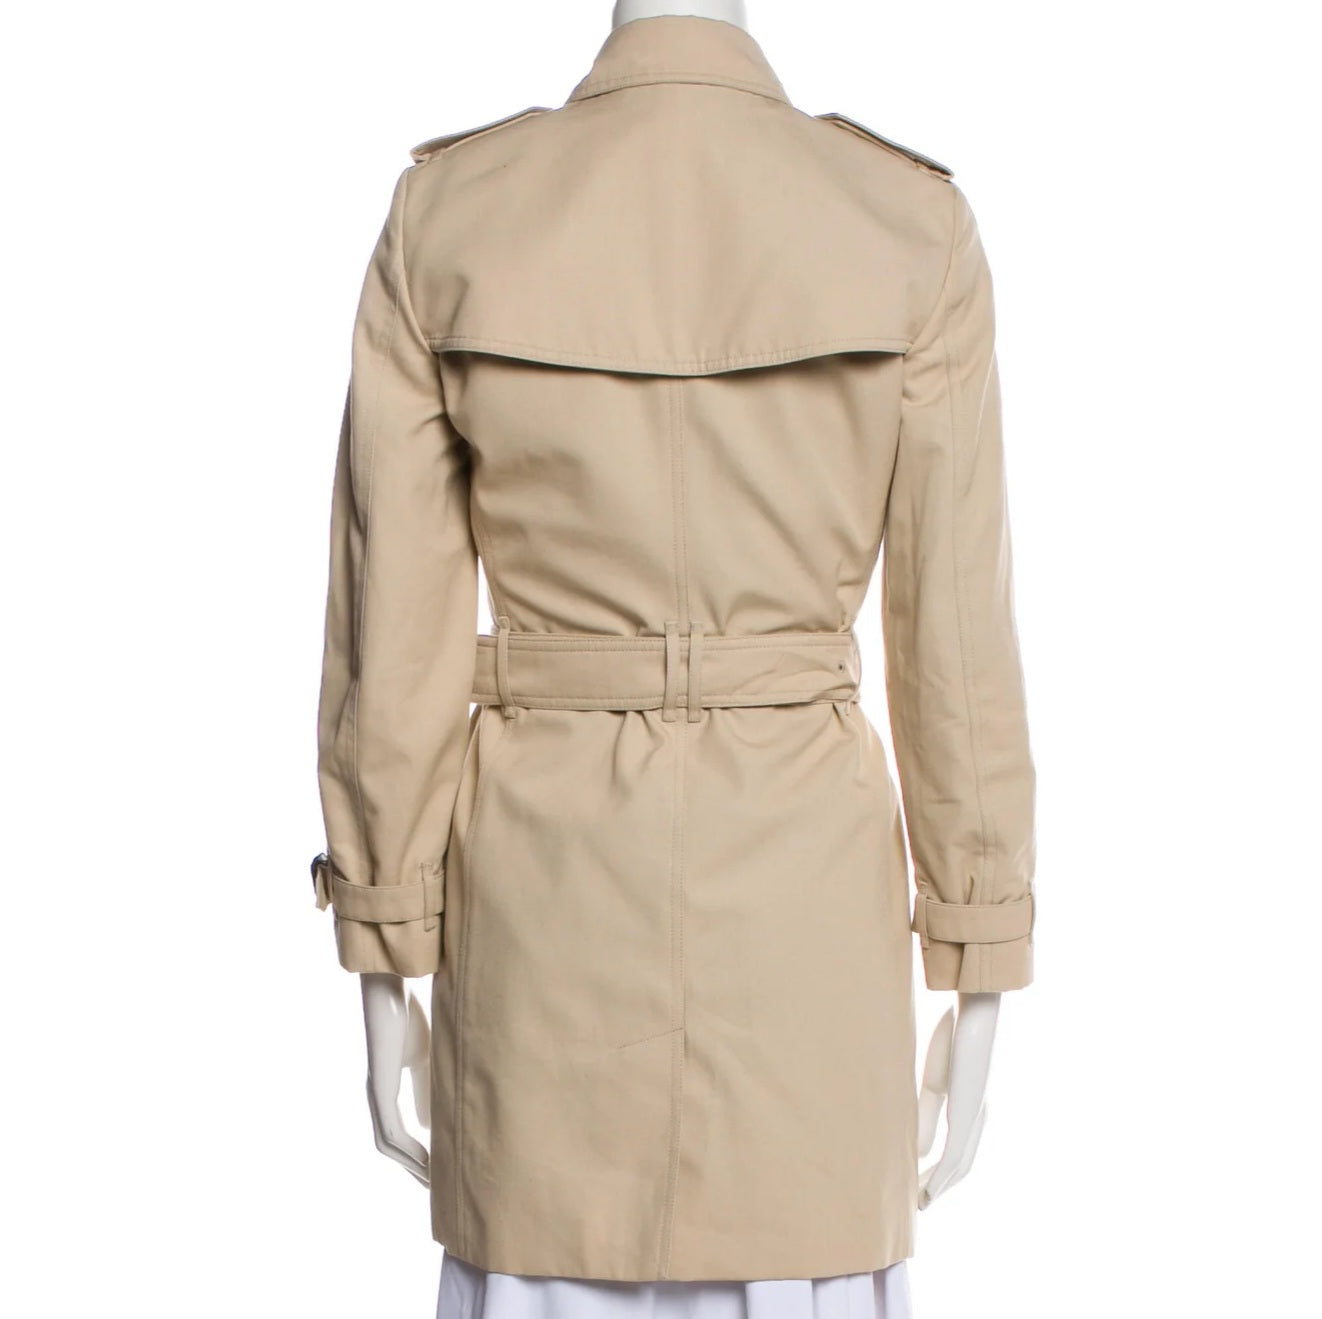 Burberry Trench Coat - Size M